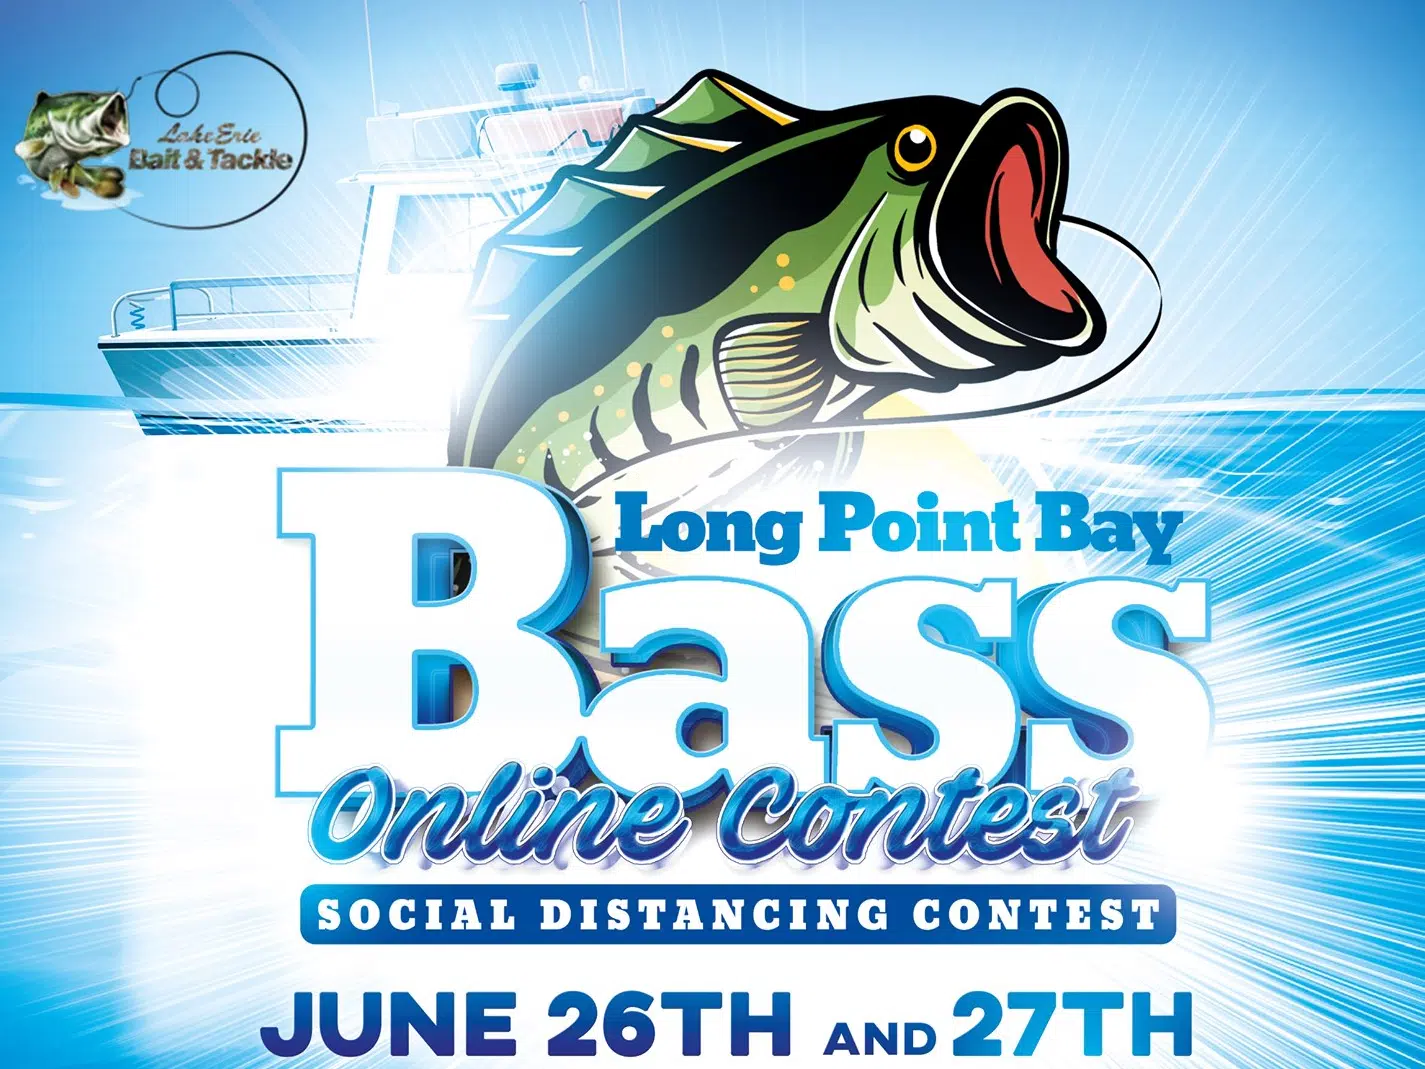 Long Point Bay Bass Opener Online Photo Contest Goes This Weekend